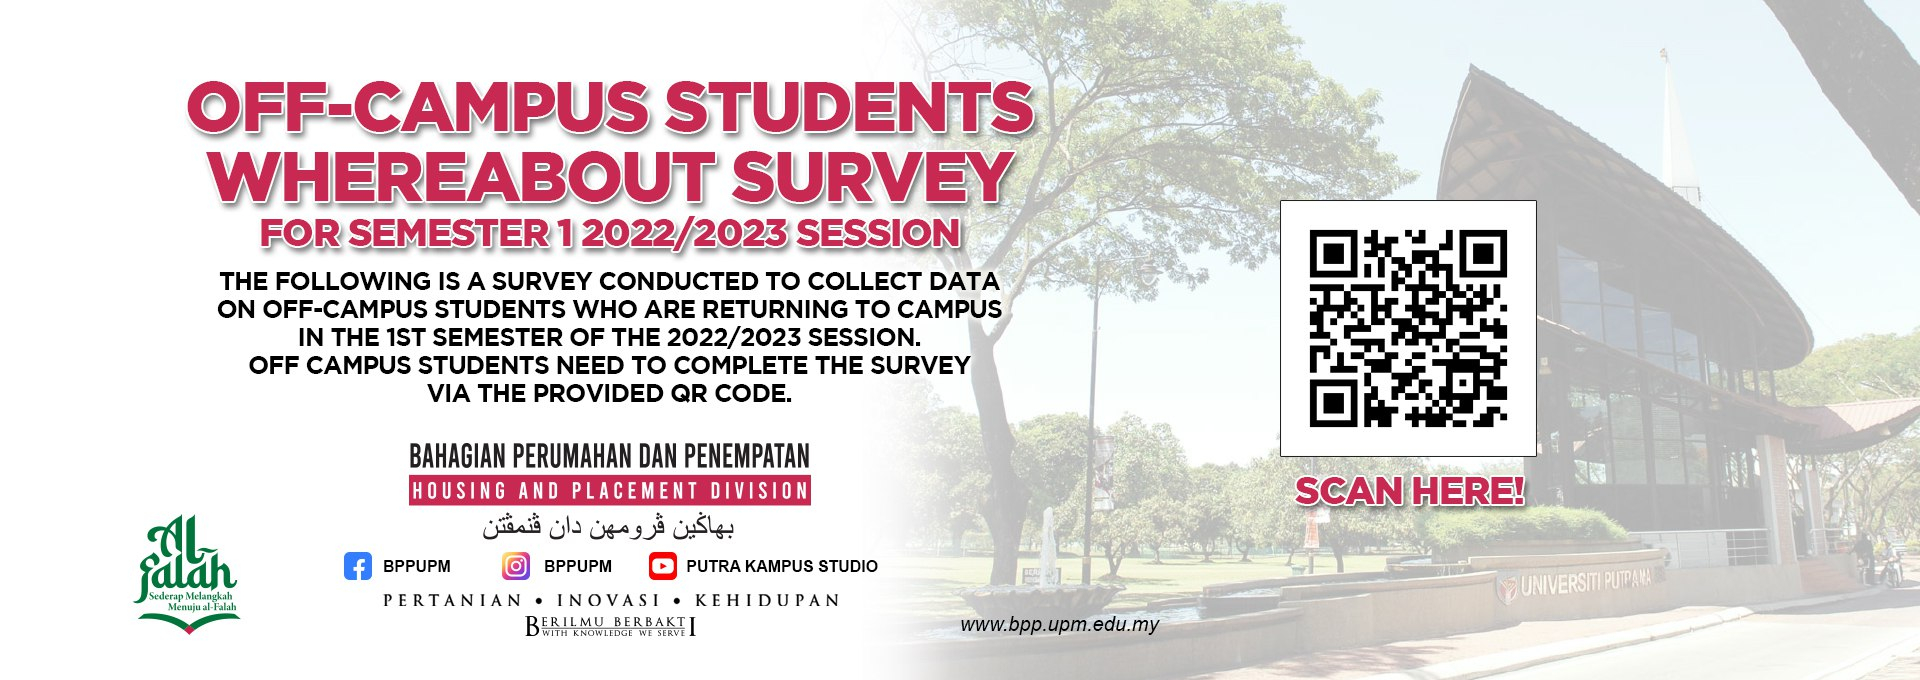 OFF-CAMPUS STUDENTS WHEREABOUT SURVEY